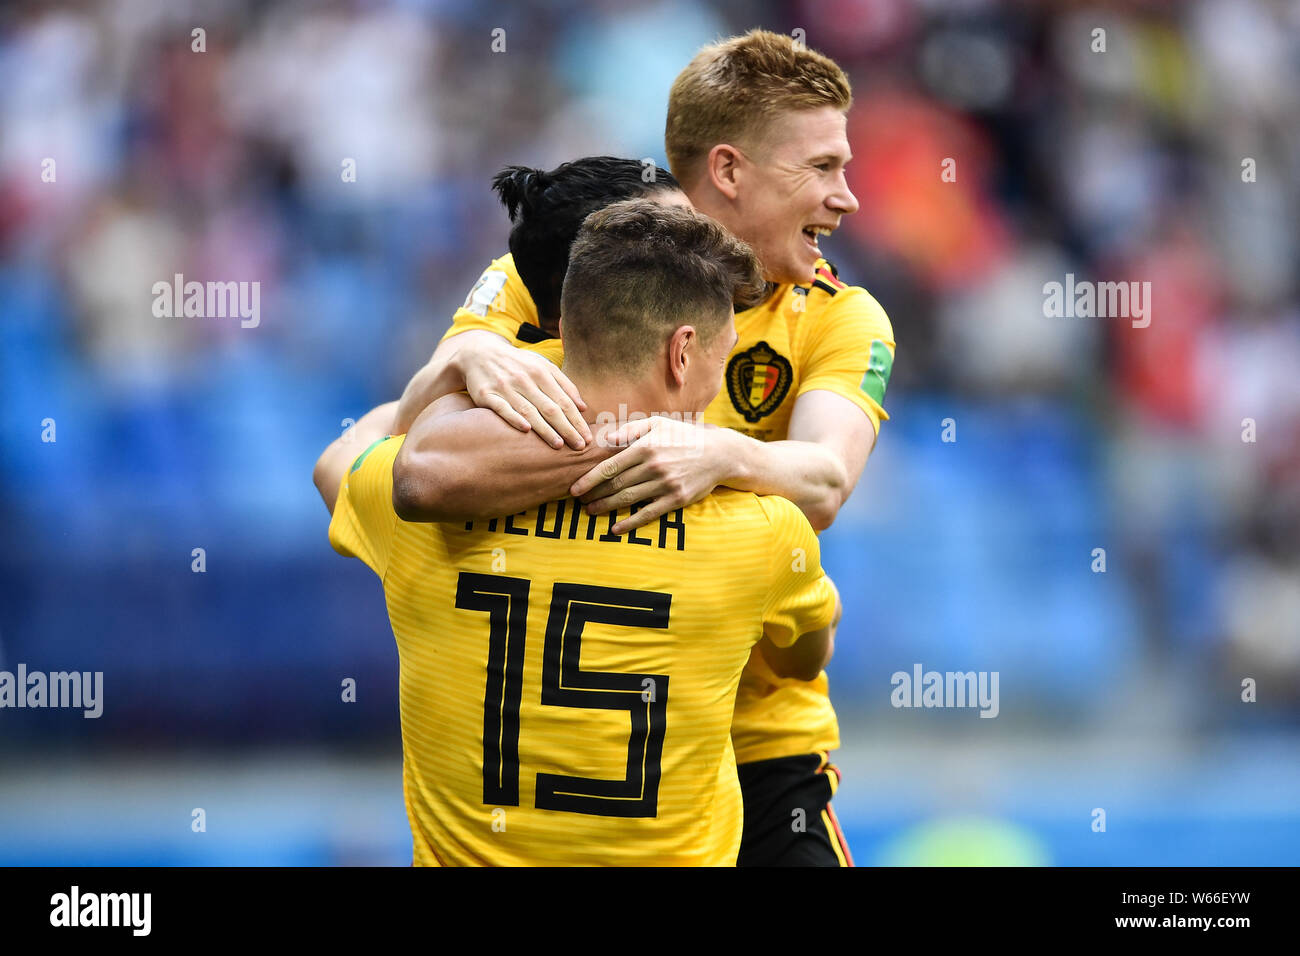 Thomas Meunier, front, of Belgium celebrates with Nacer Chadli, center, and Kevin De Bruyne after scoring Belgium's first goal against England in thei Stock Photo